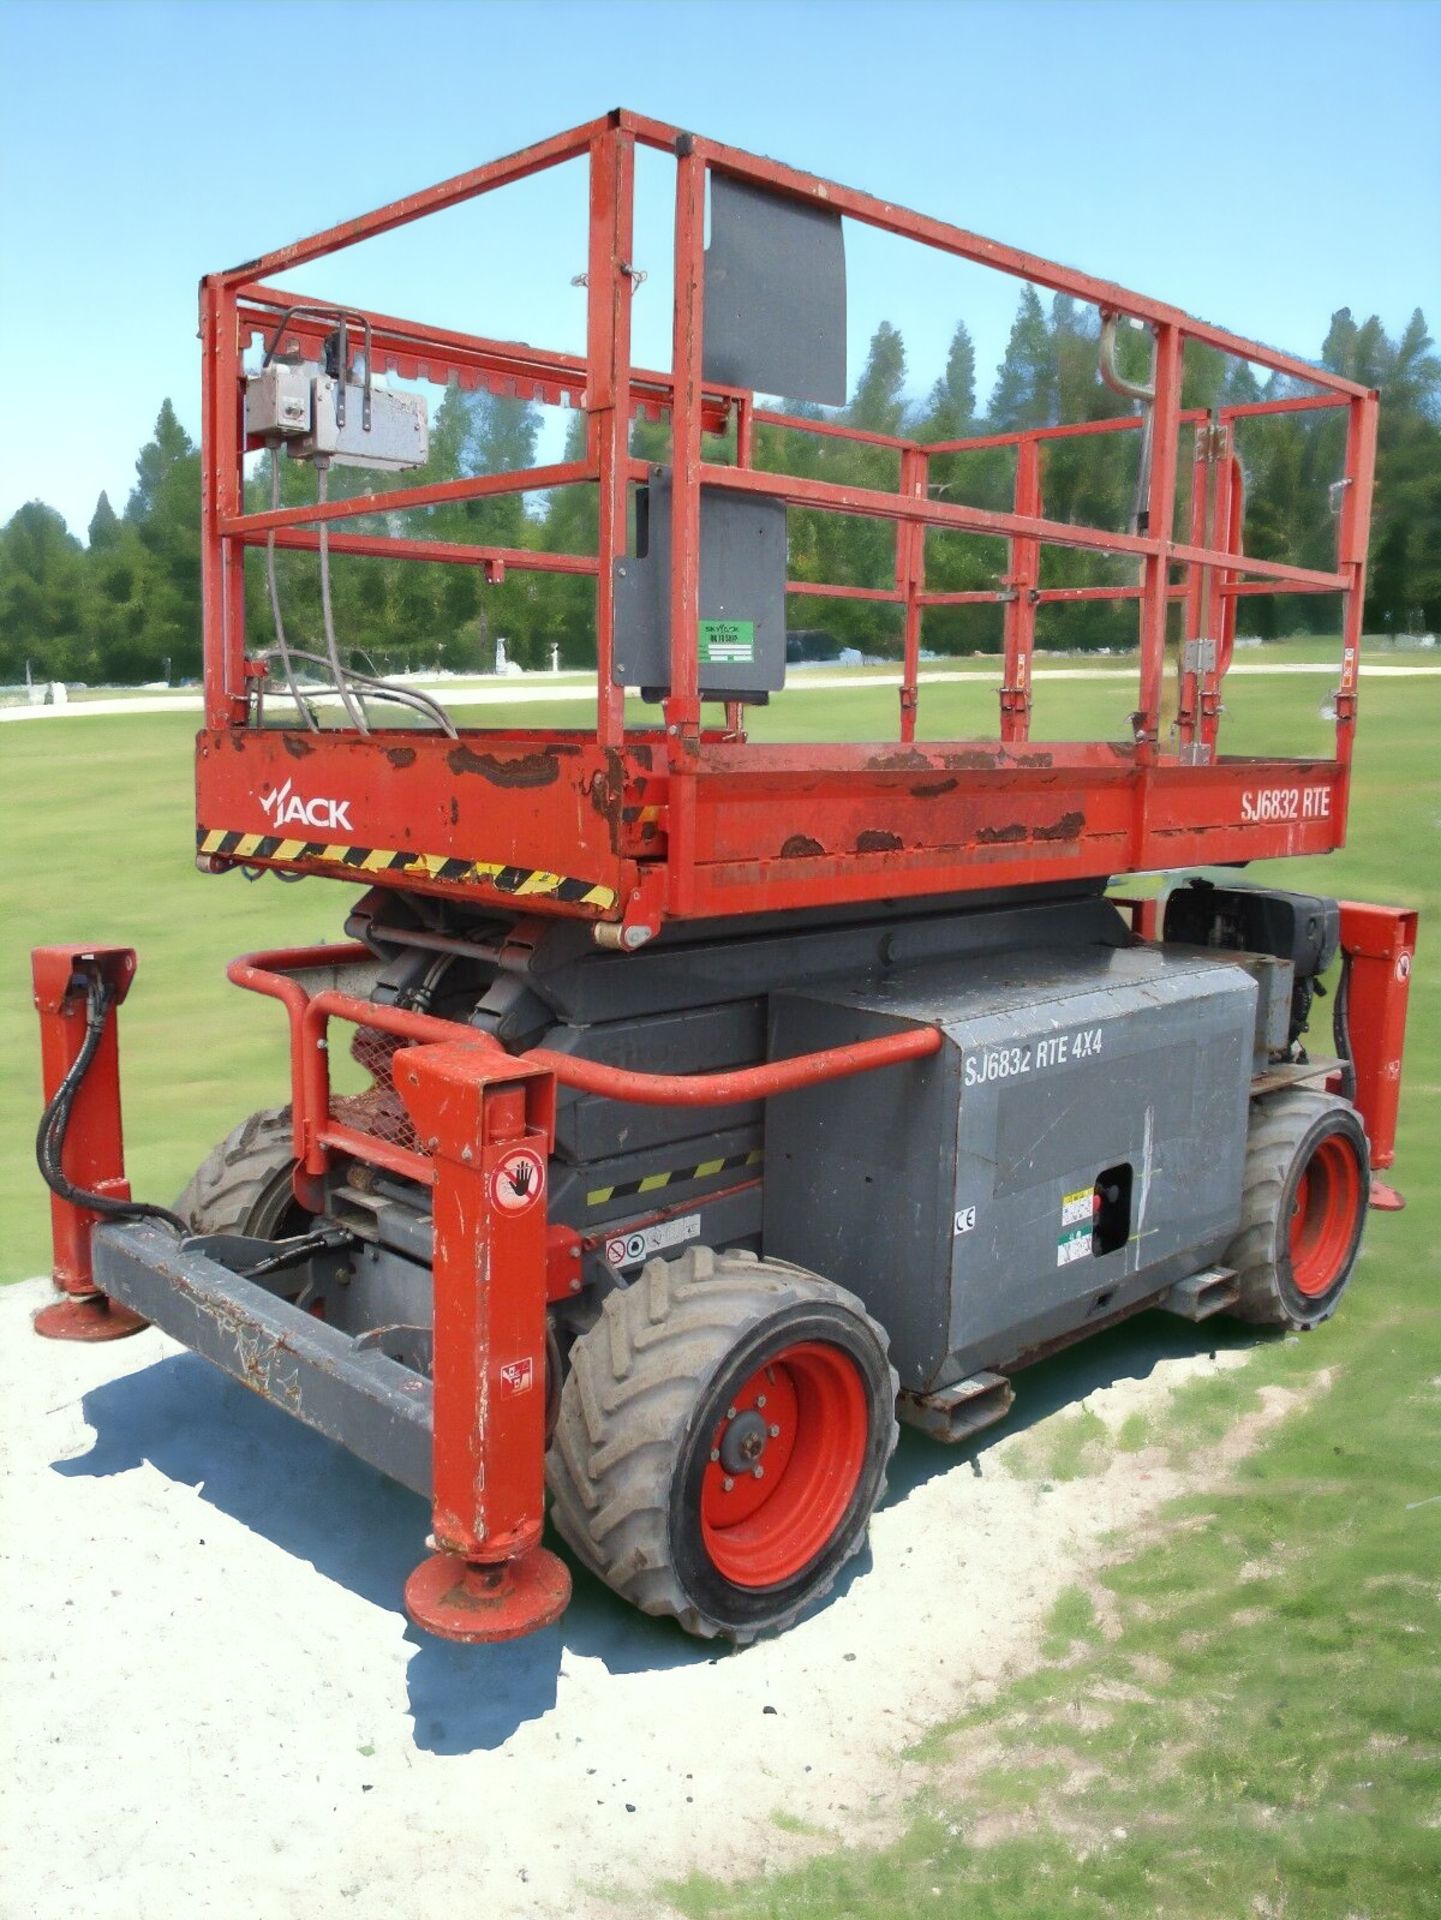 2014 SKYJACK SJ6832RTE SCISSOR LIFT - REACH NEW HEIGHTS WITH EFFICIENCY AND VERSATILITY - Image 7 of 15